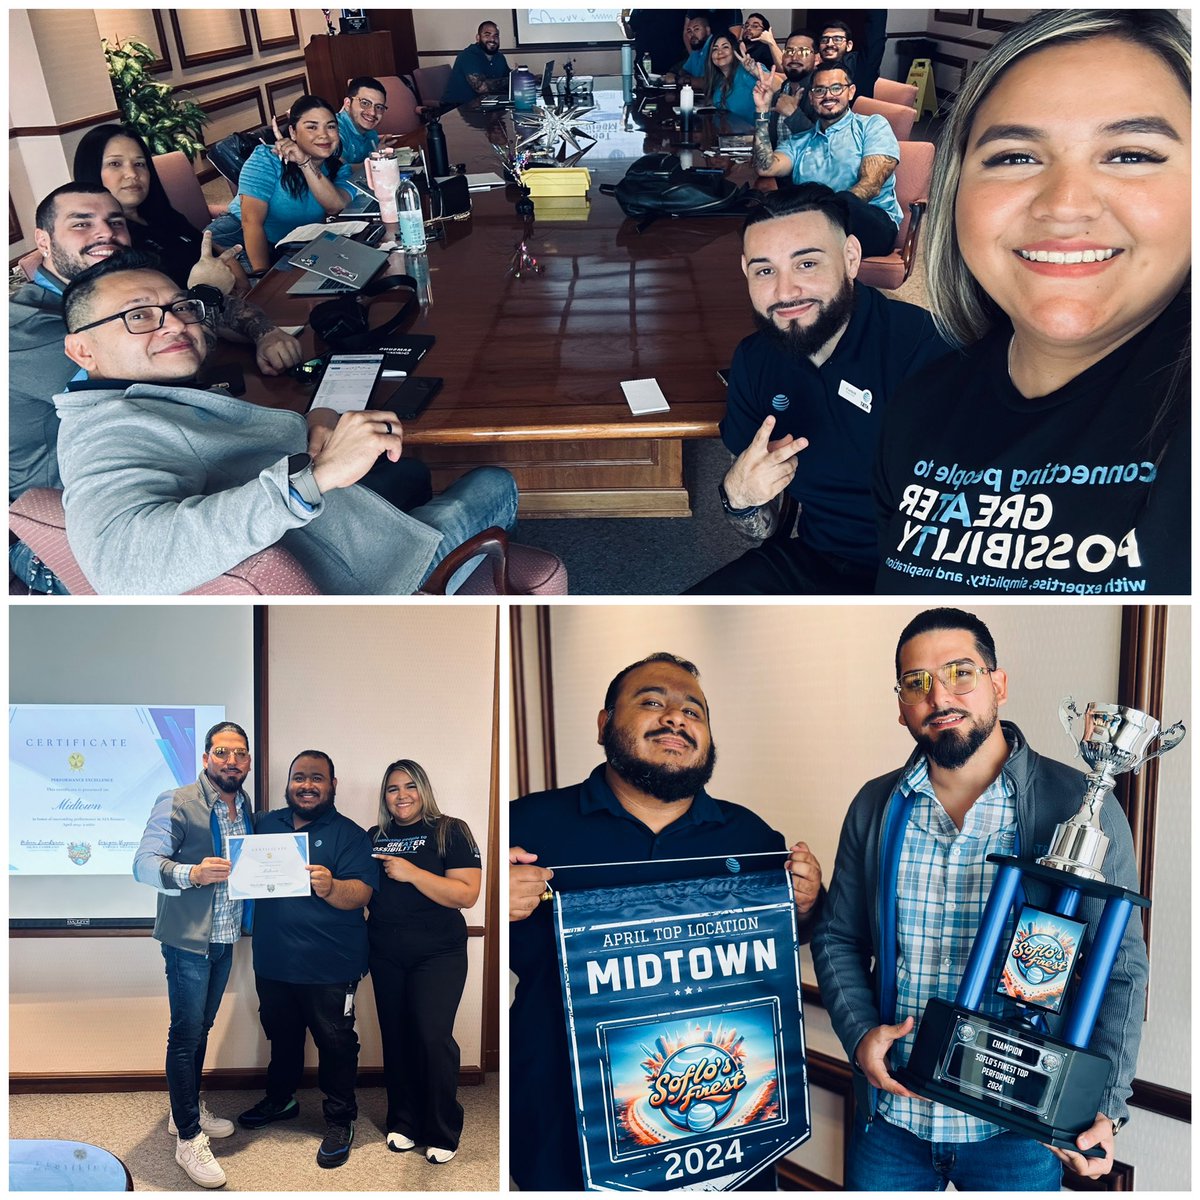 As I bid farewell to the Midtown store location, I'm filled with gratitude and excitement for the future! A huge thanks to @DilmaZambrano_ for recognizing our outstanding success in April. I'm proud of what we achieved and look forward to the next chapter in my career. @One_FLA